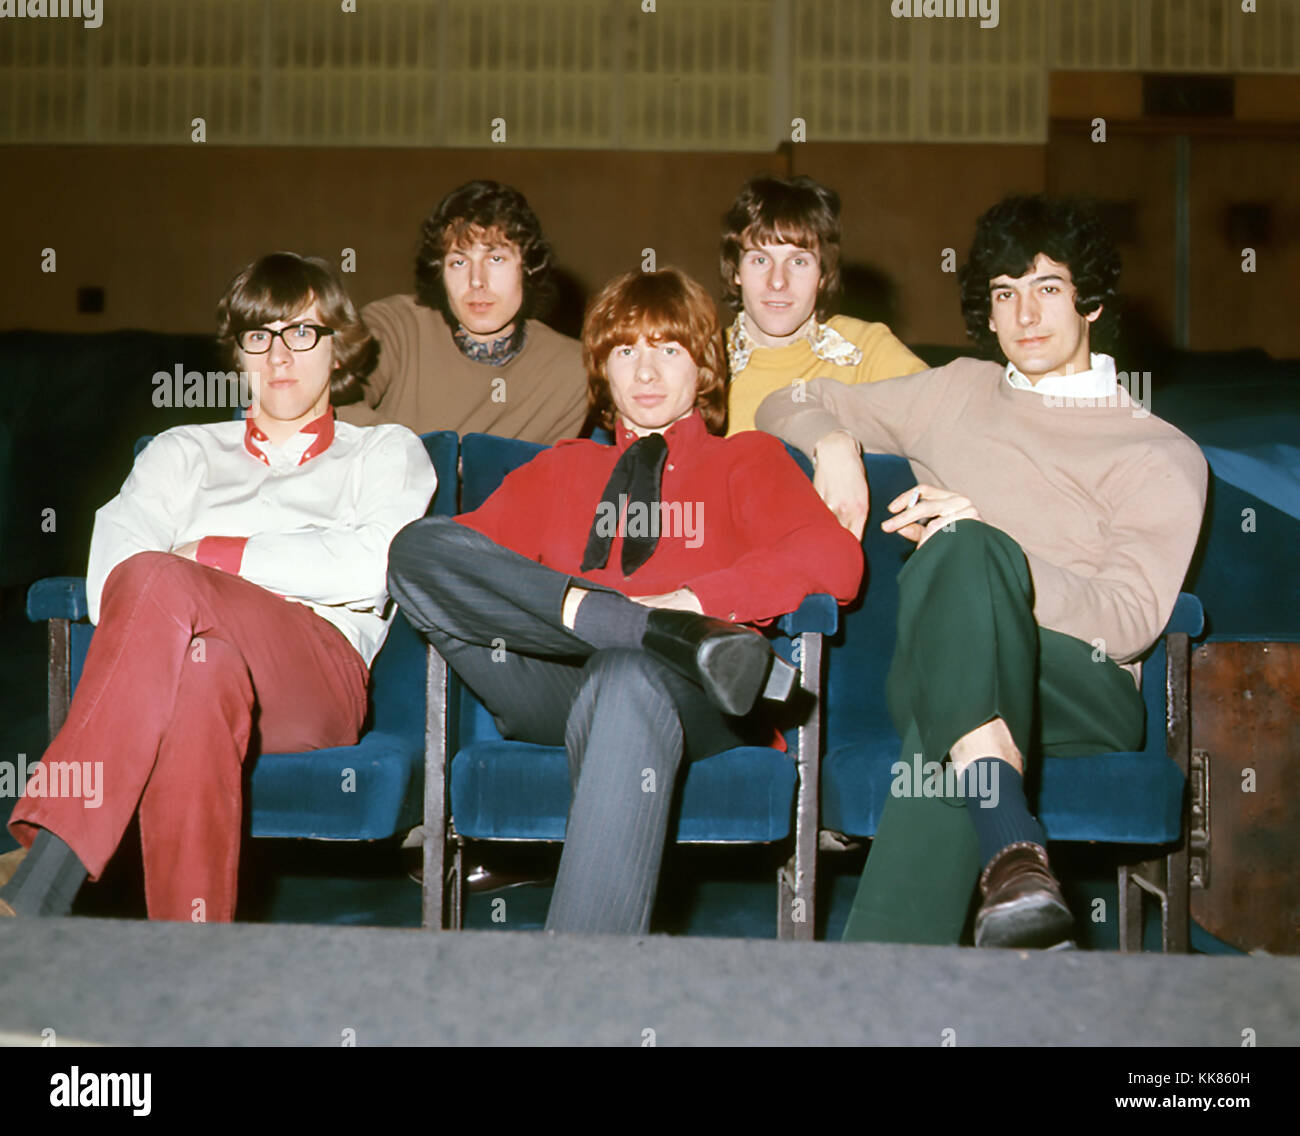 THE END  UK pop group about 1966. Stock Photo